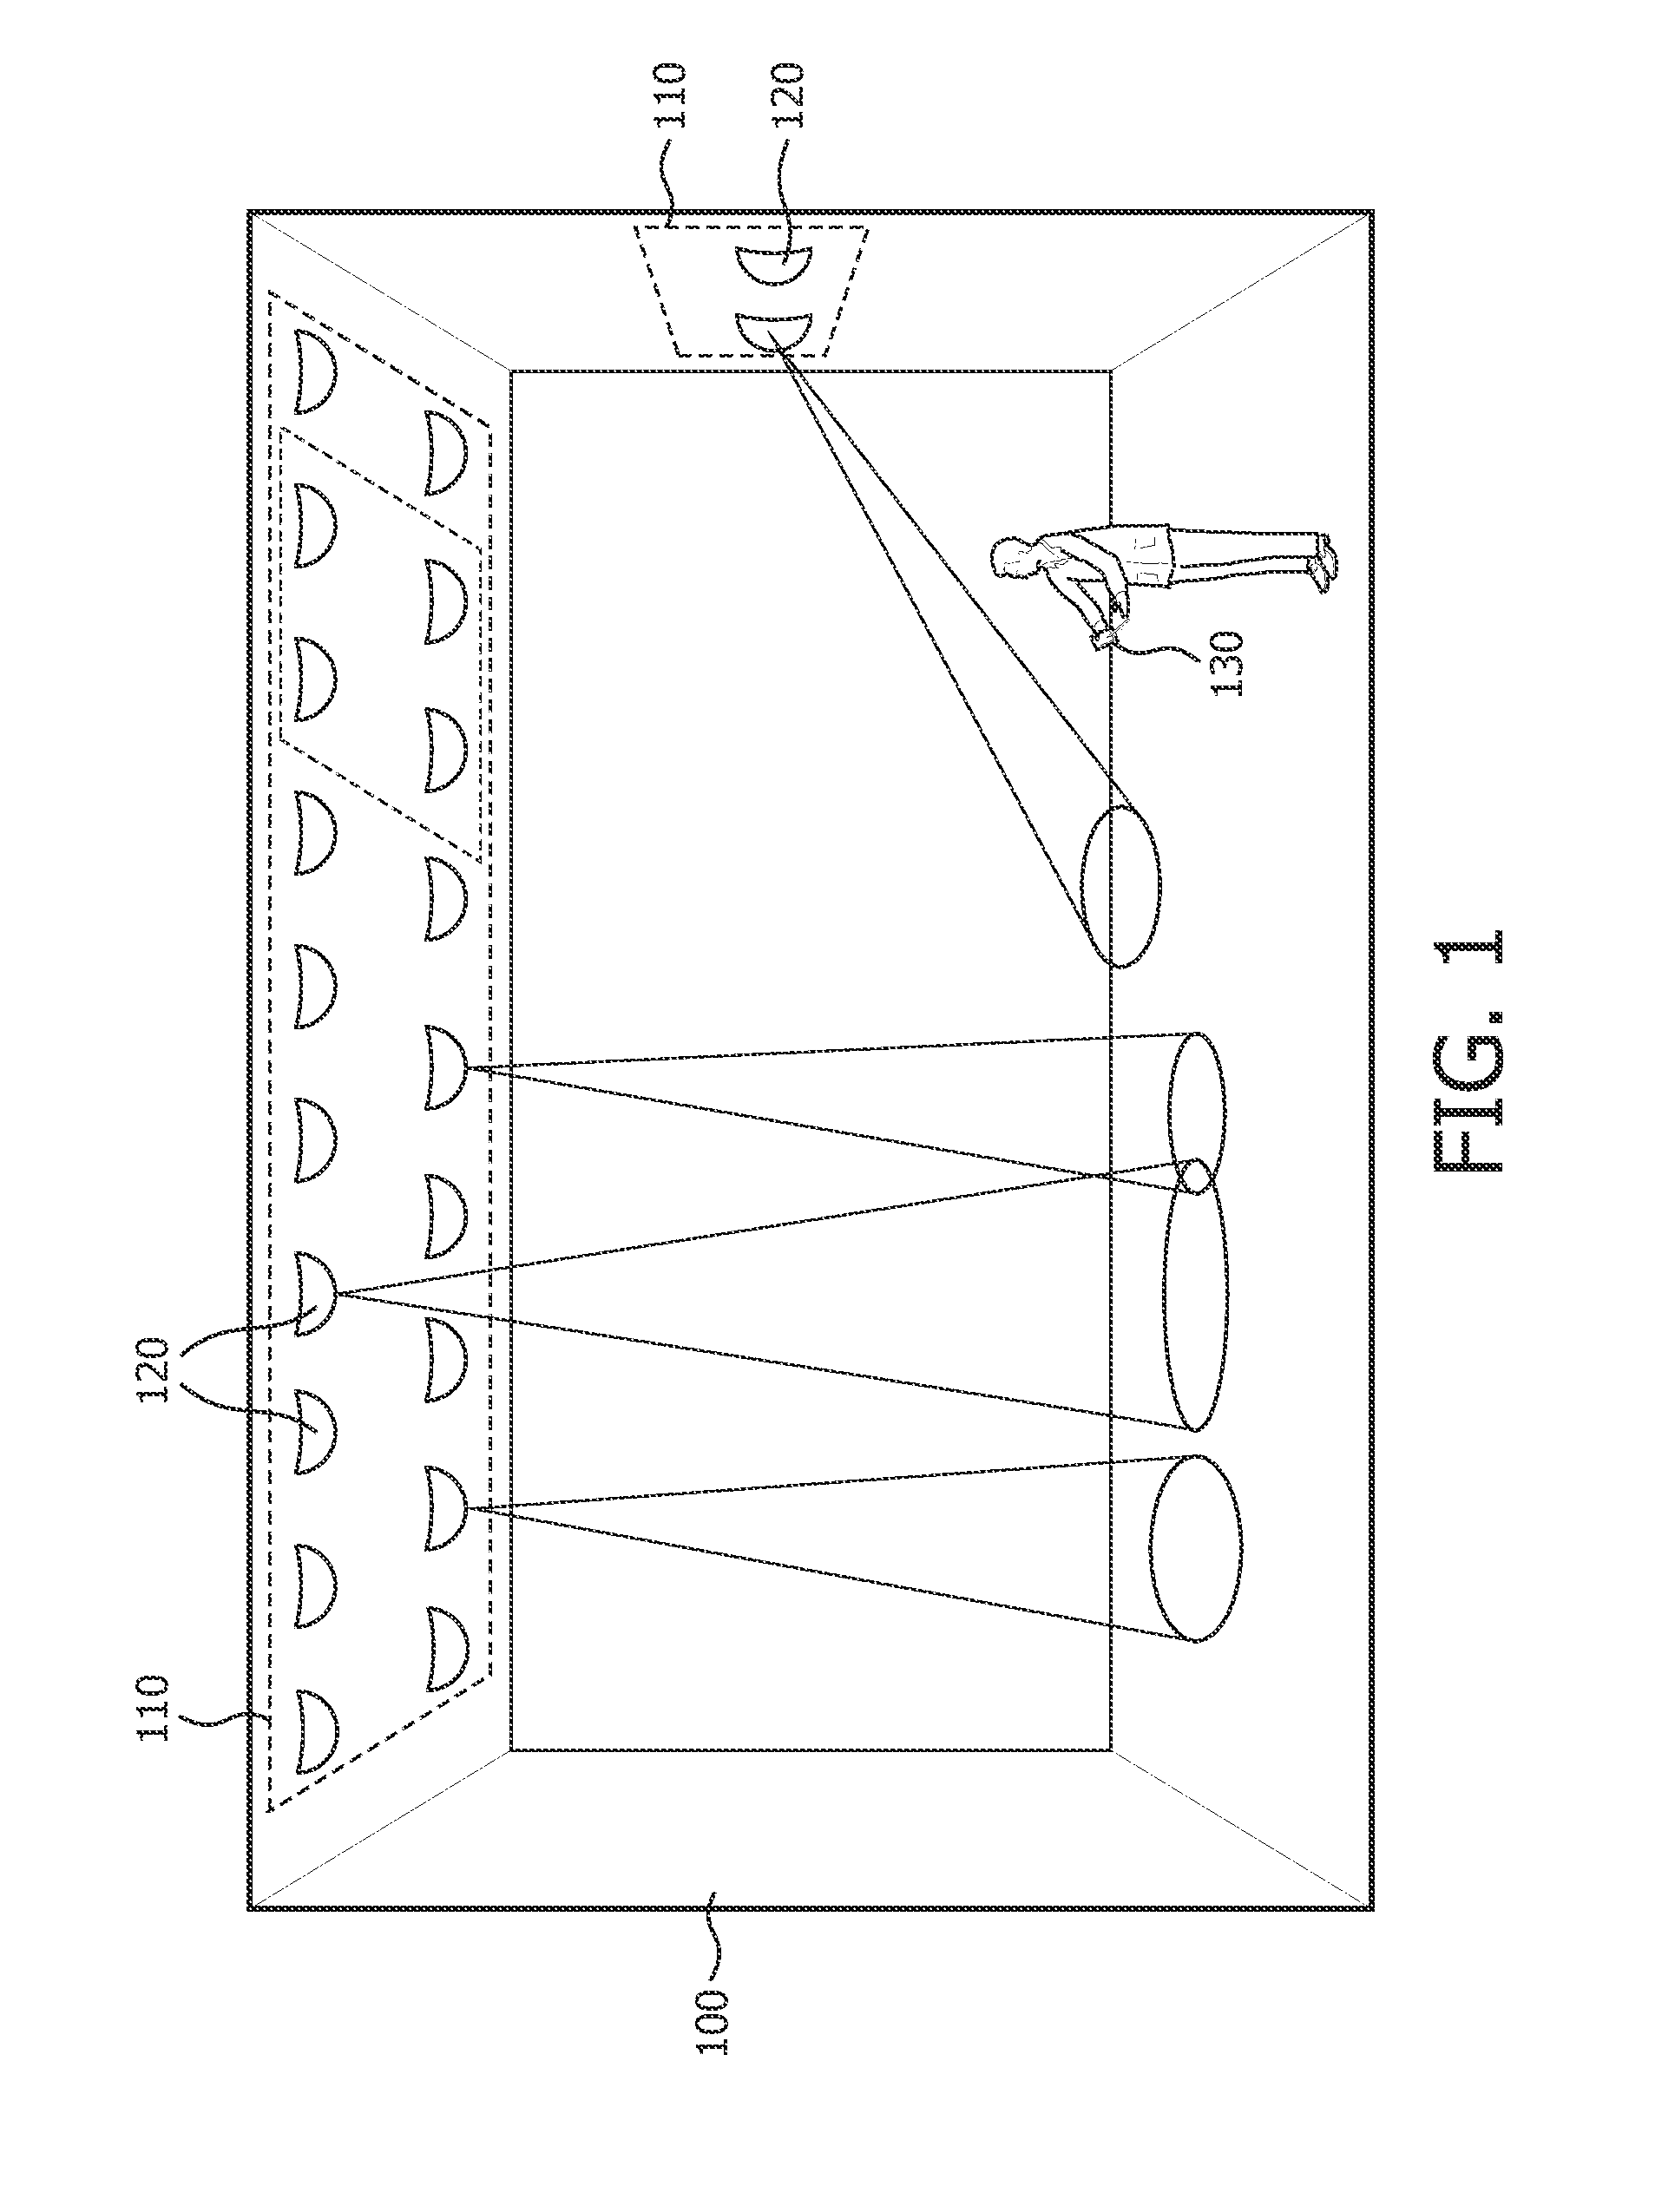 Method and system for asynchronous lamp identification